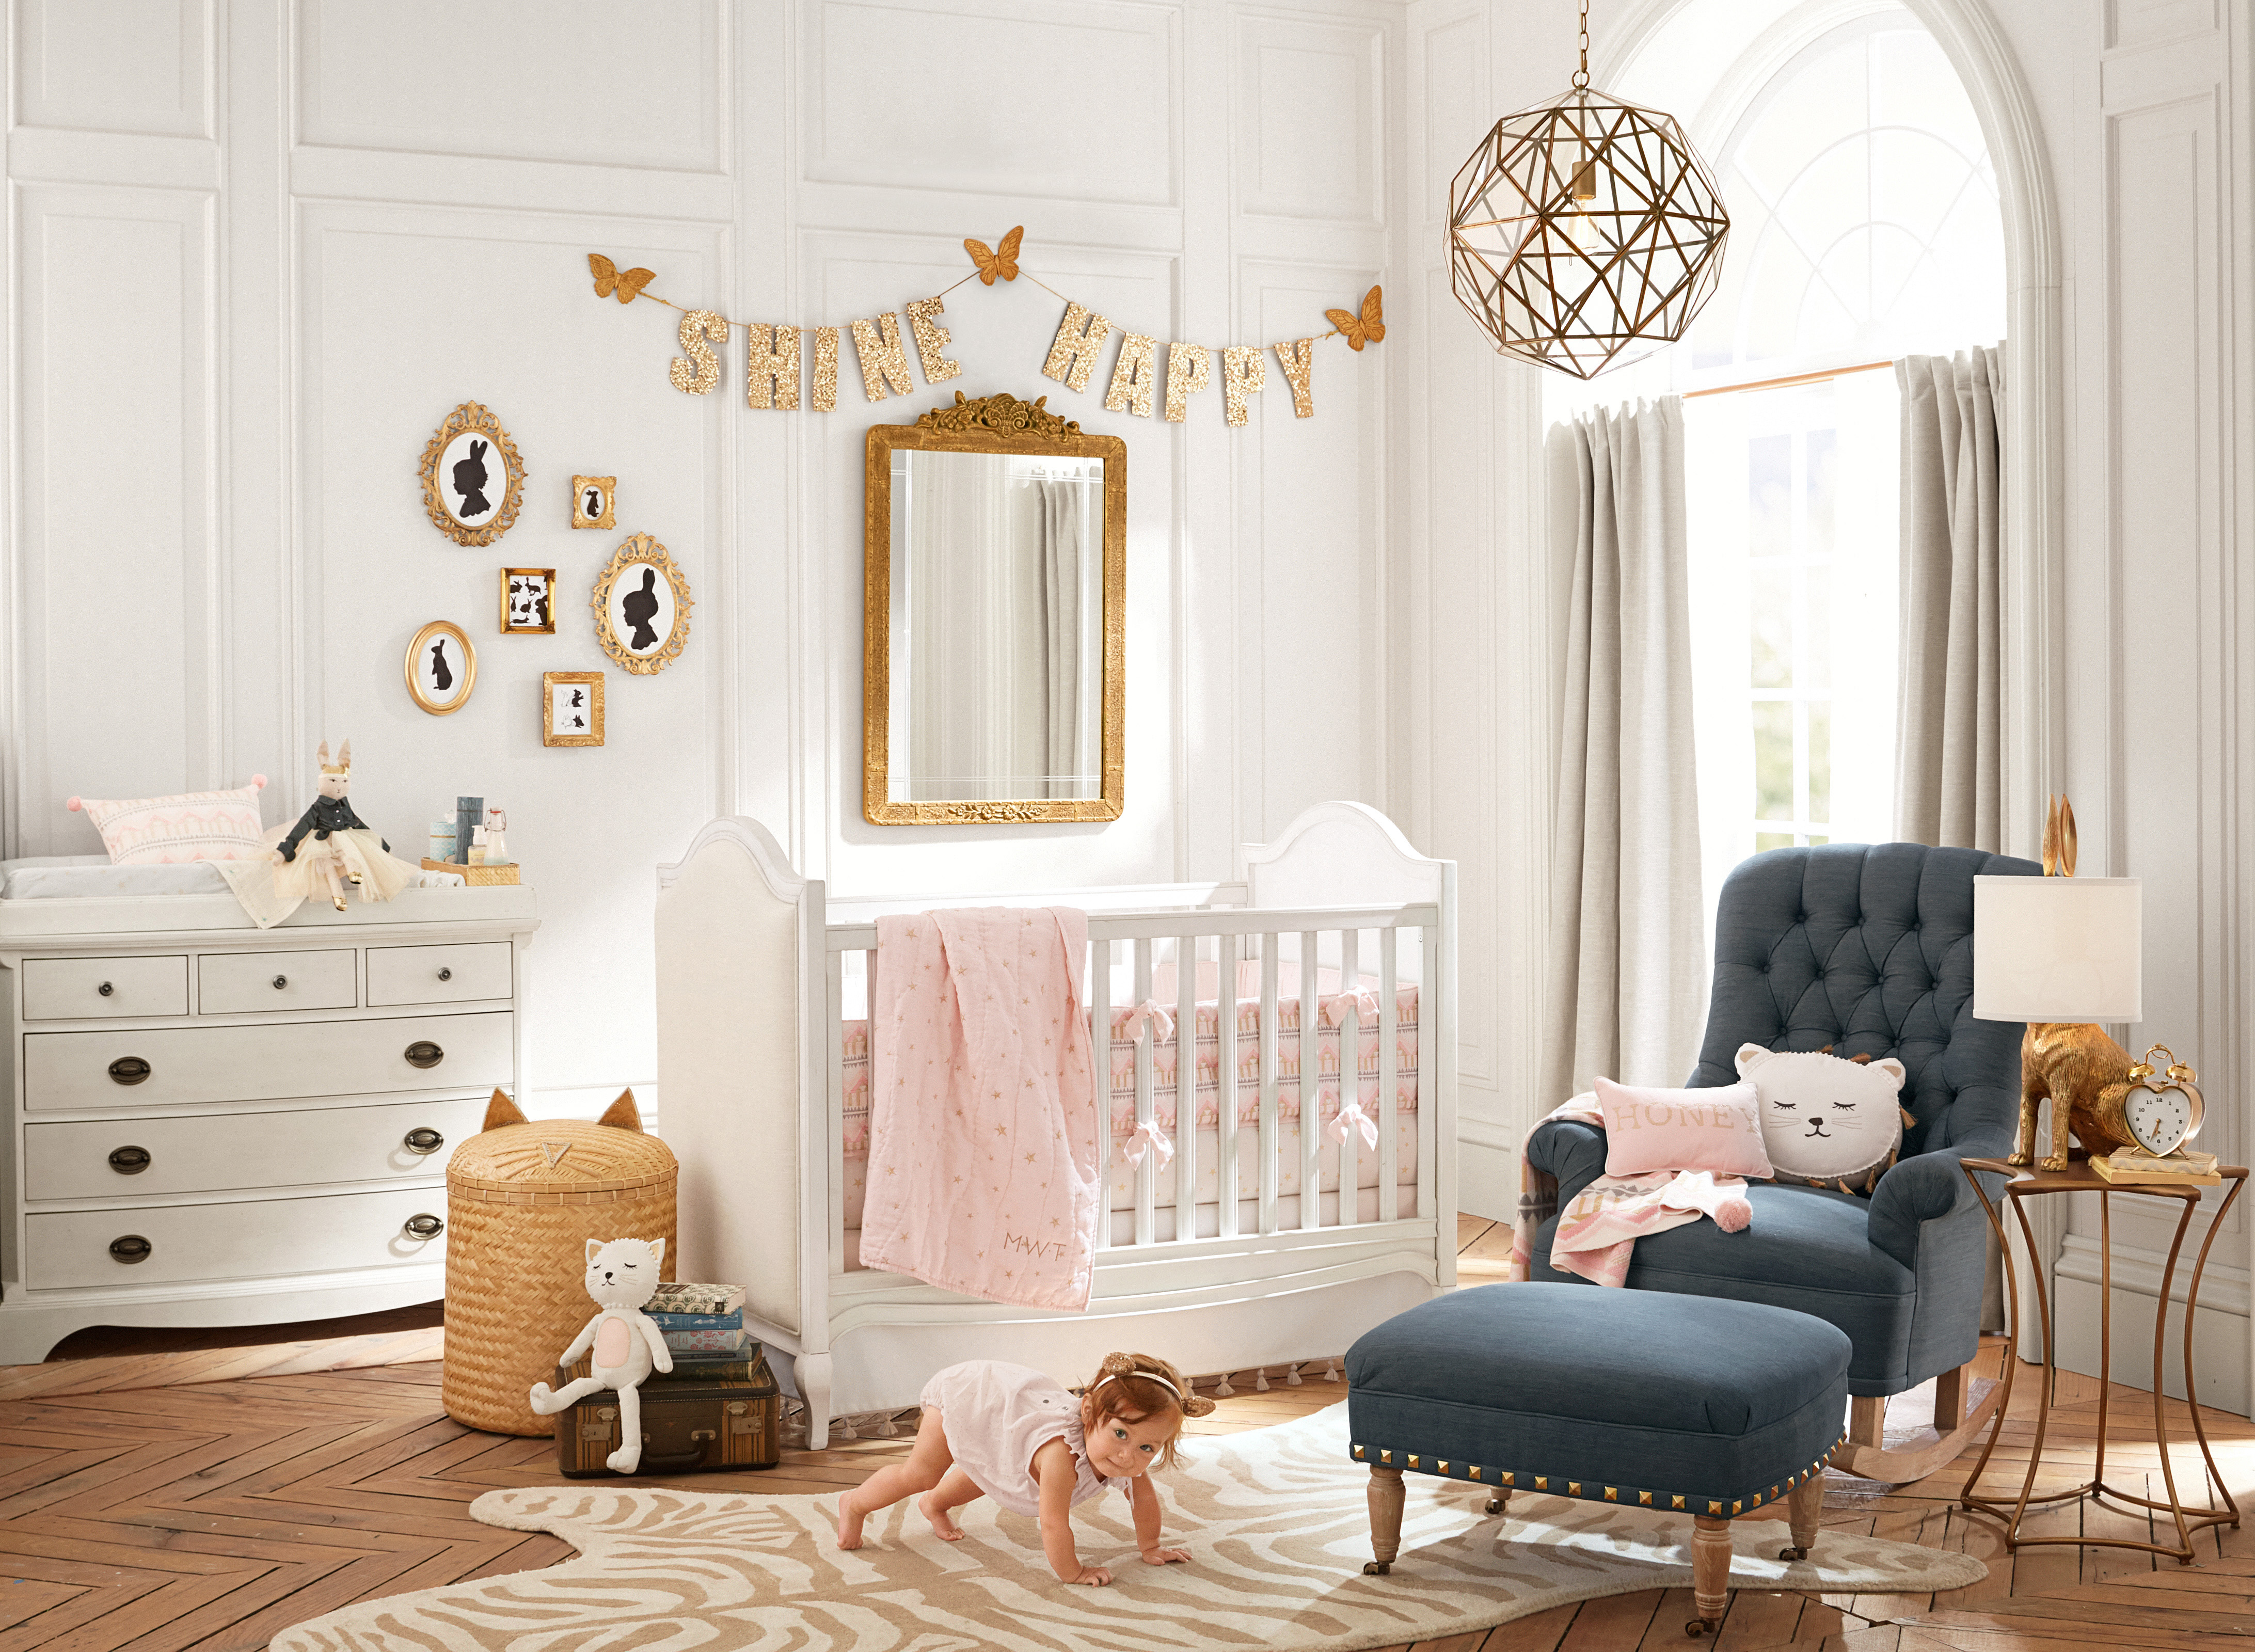 Pottery Barn Kids taps husband-and-wife design team for new children's line